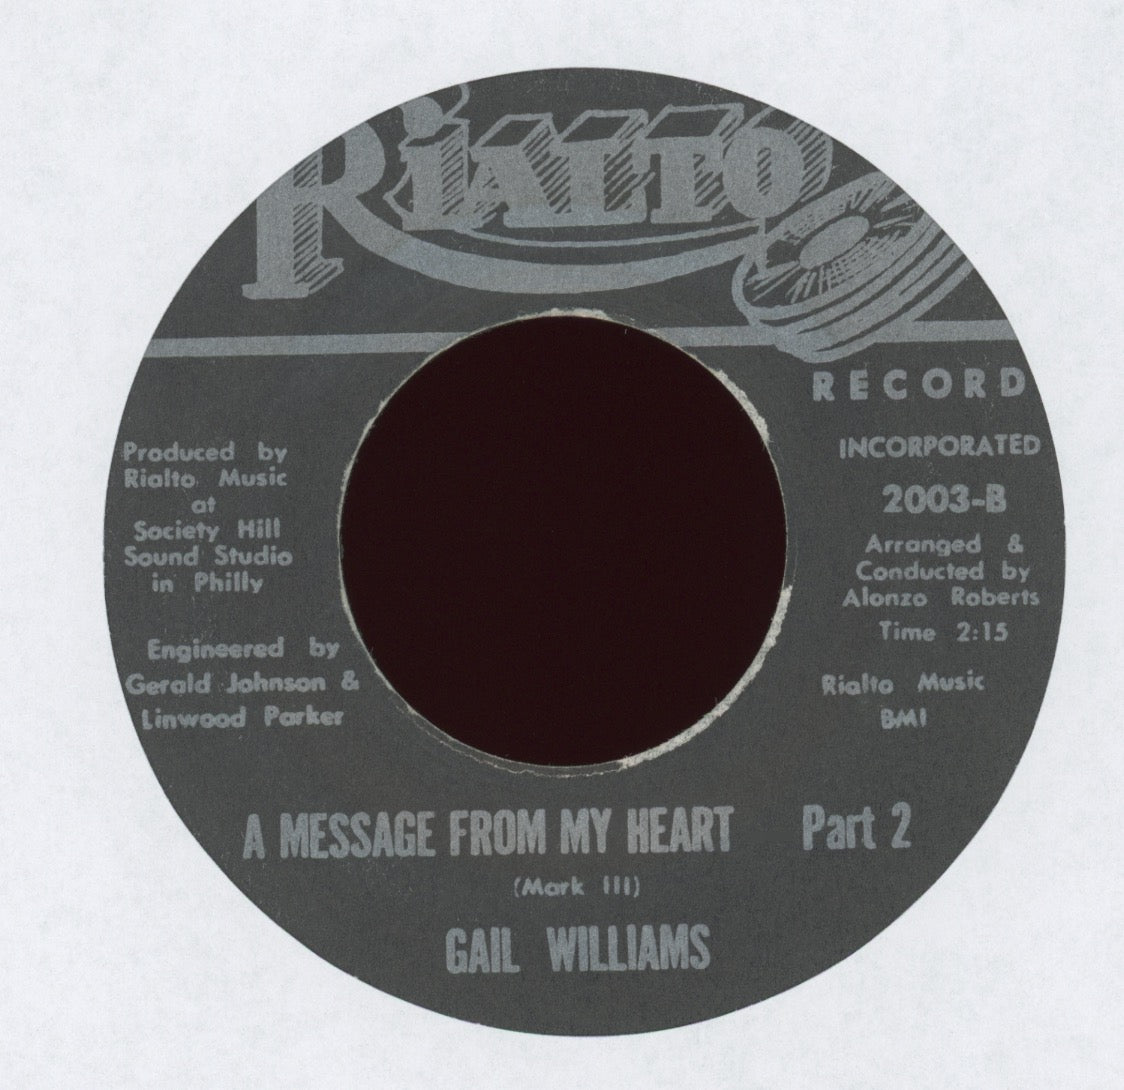 Gail Williams - A Message From My Heart Pt.1 / Pt.2 on Rialto